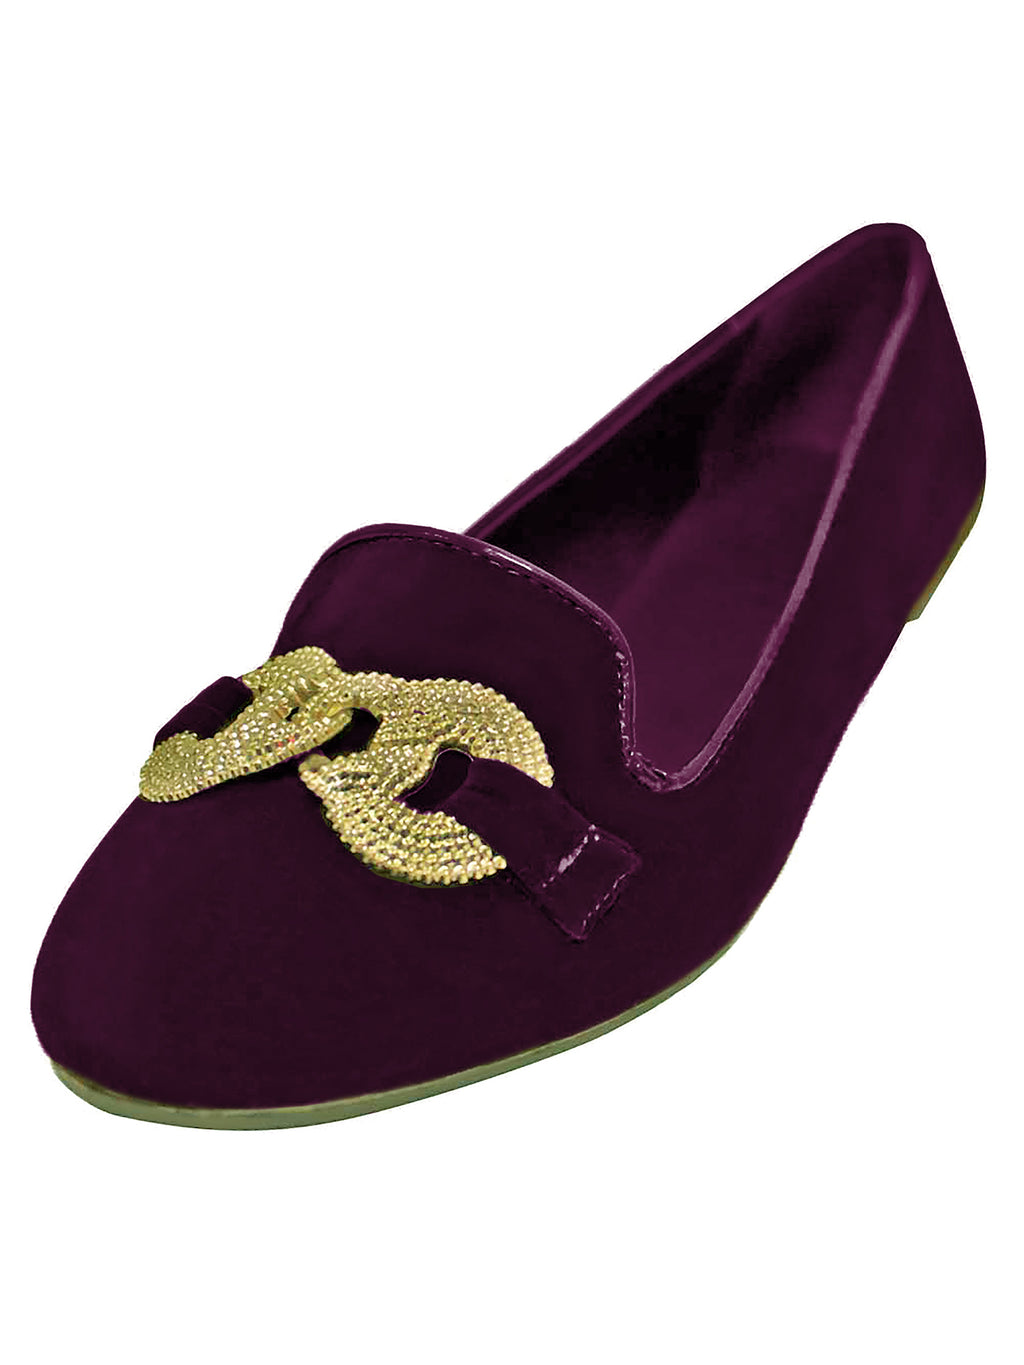 Suede Womens Ballet Flats With Silver Buckle